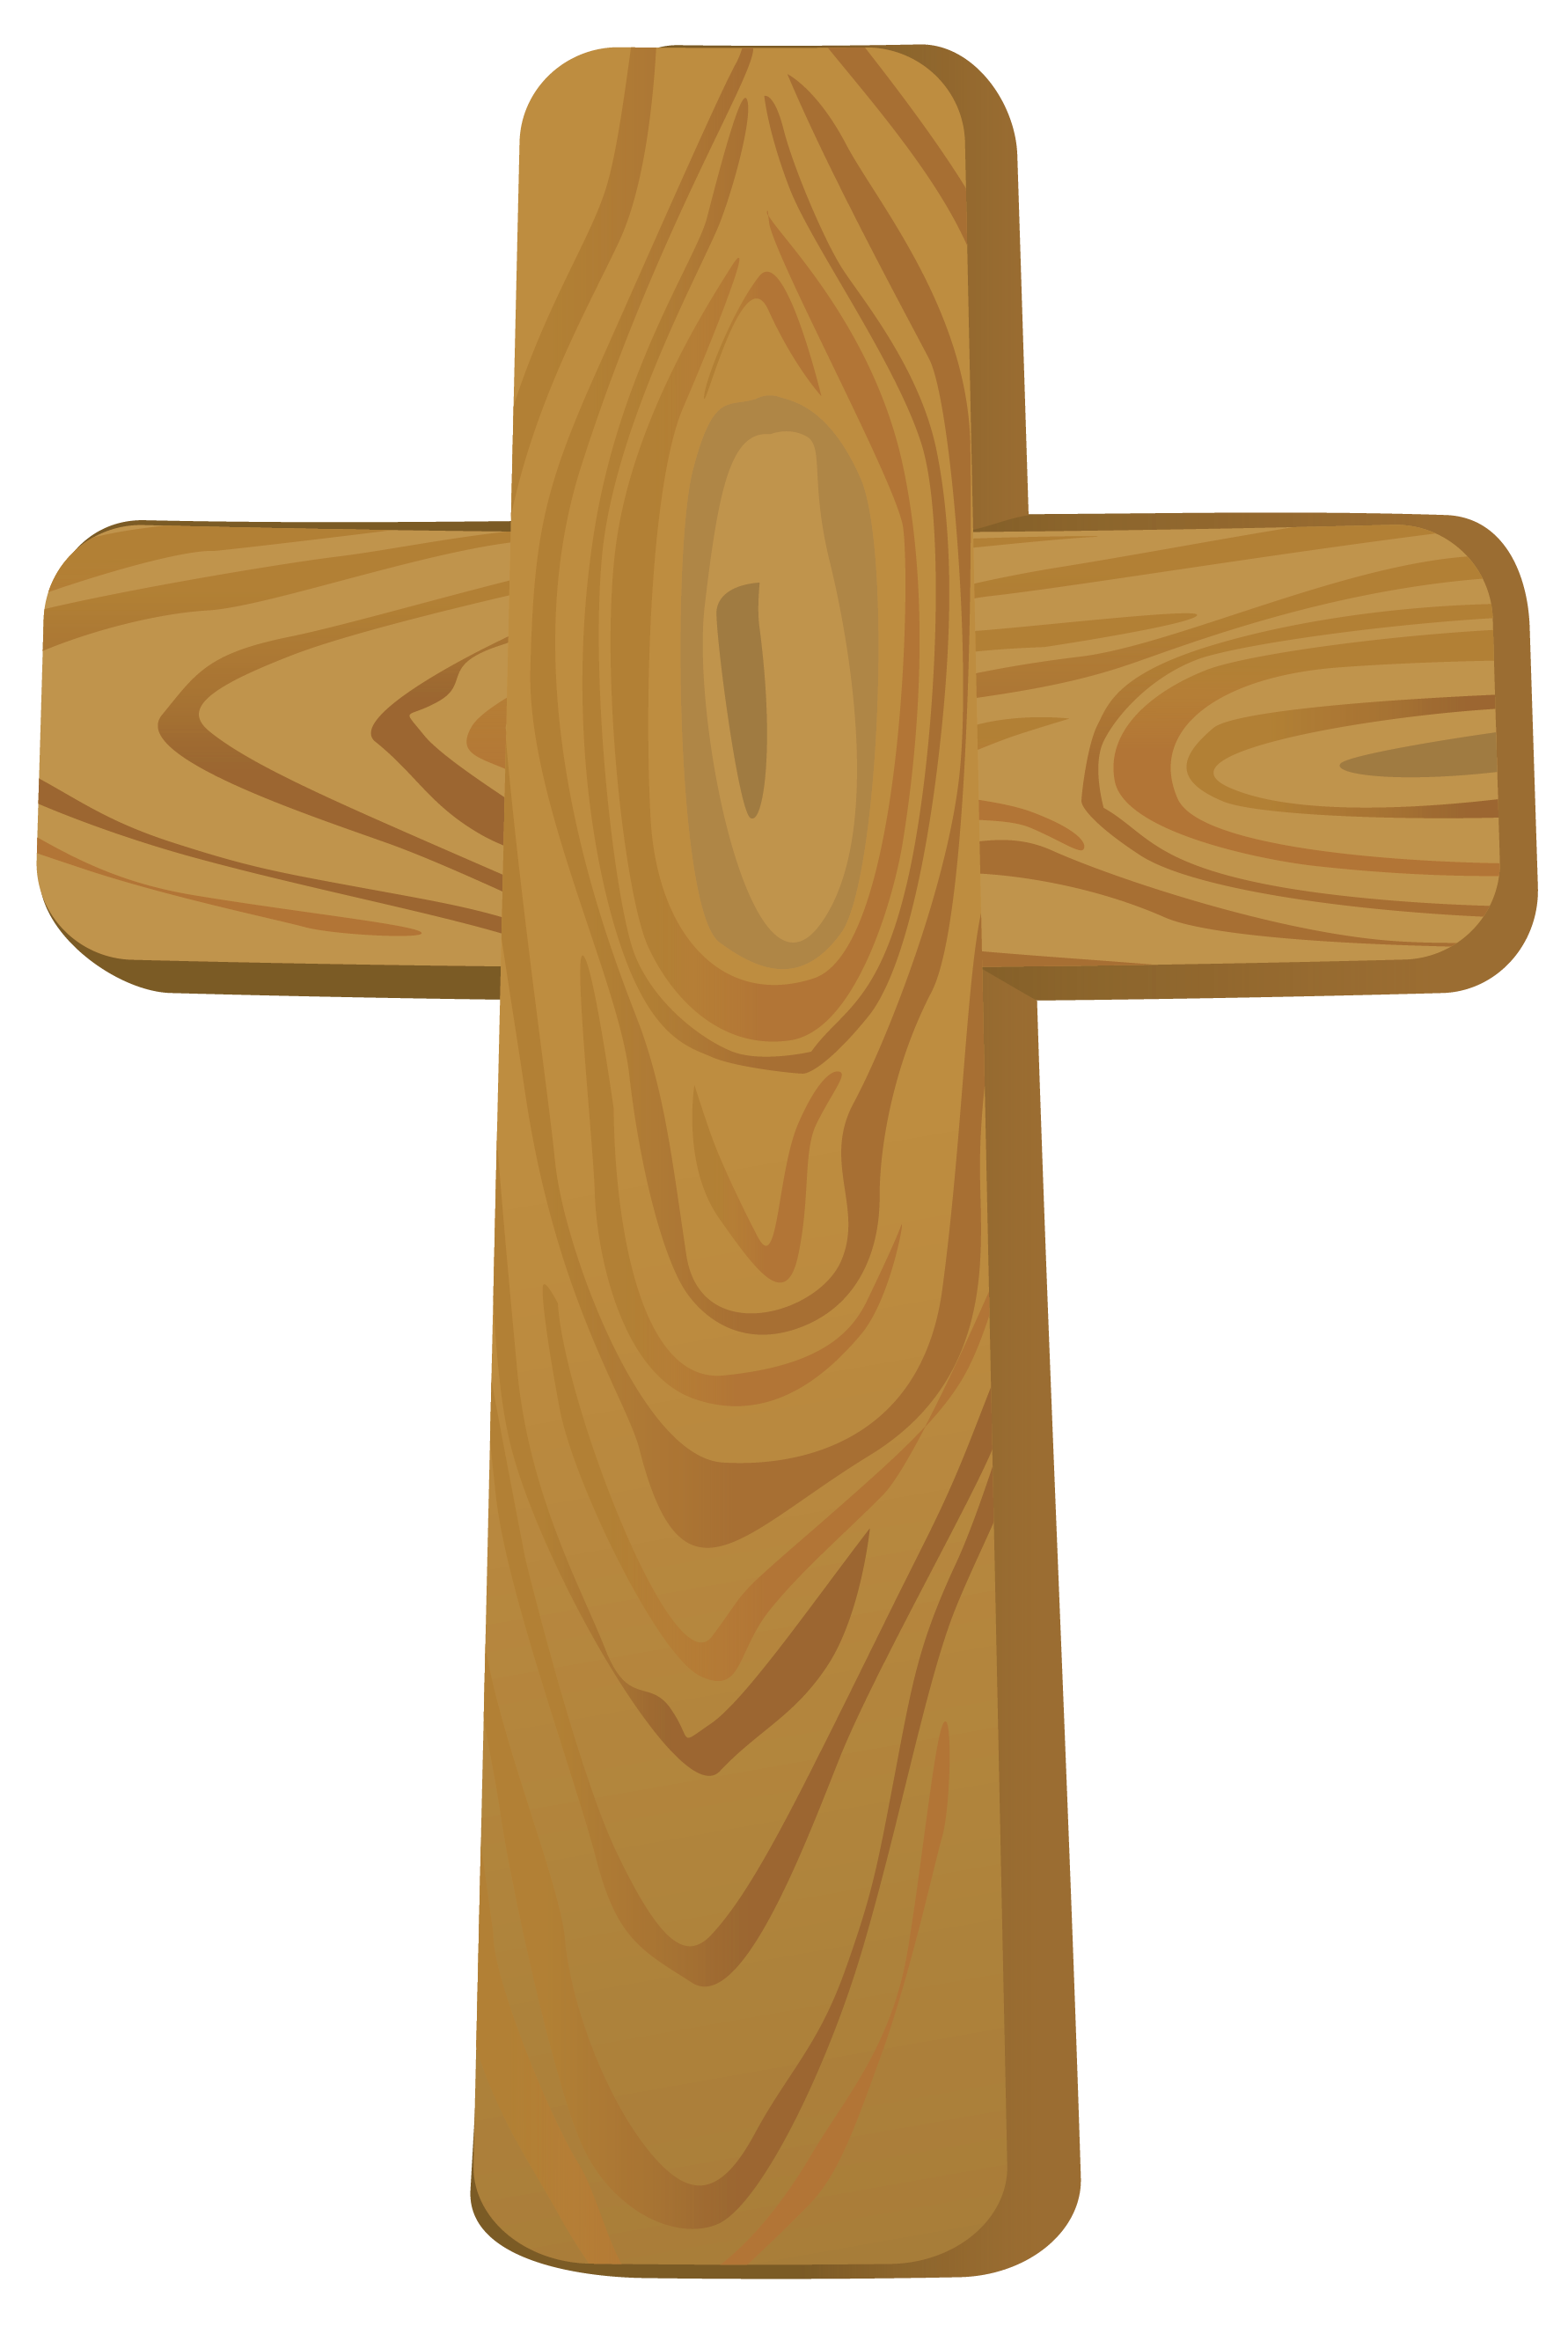 Wood cross . See clipart transparent